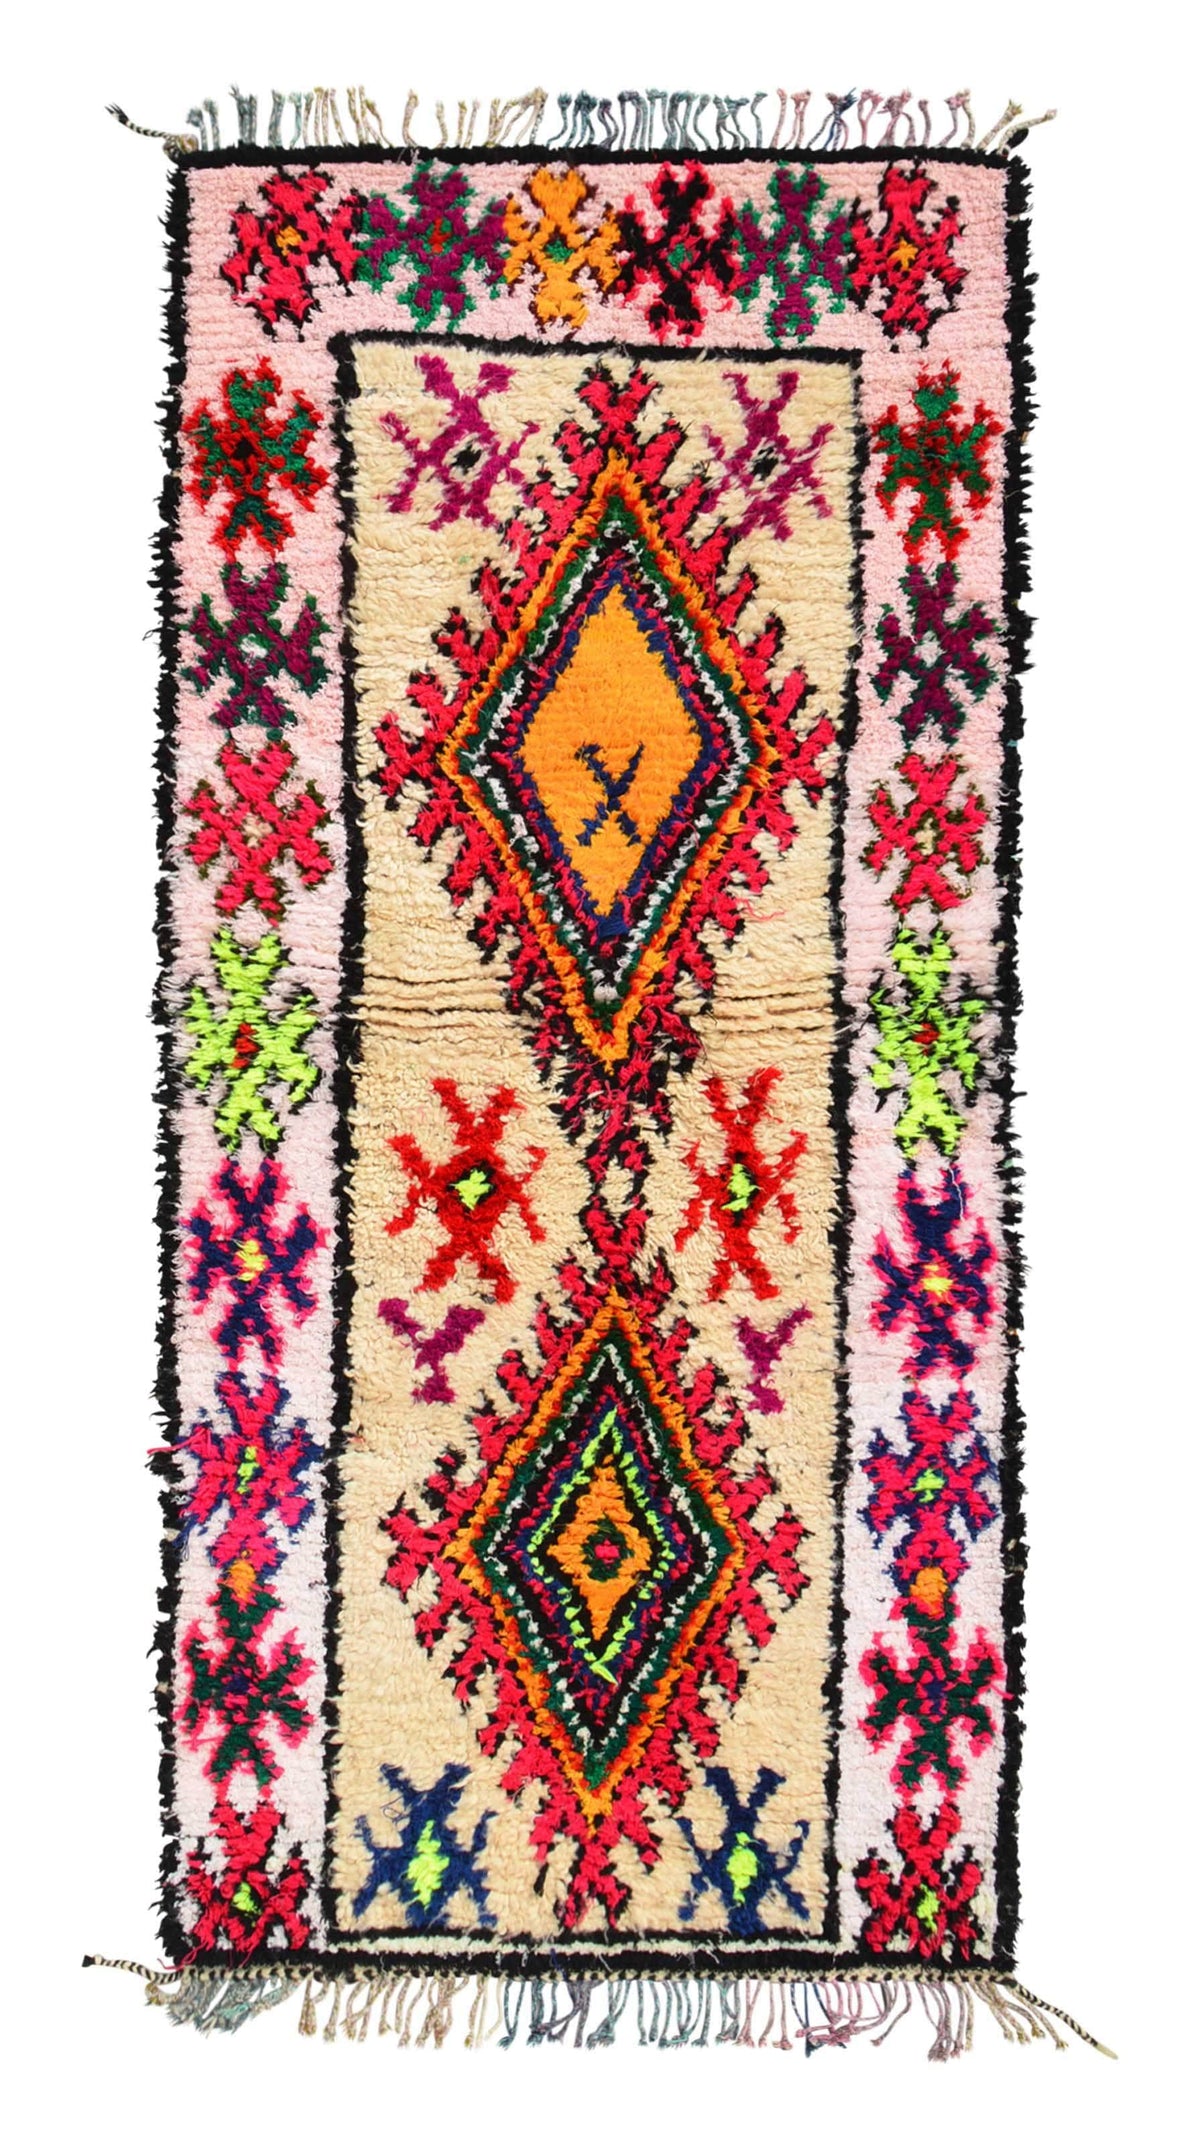 Vintage Moroccan Rug Vintage Inspired Runner Rugs | Moroccan Style Rug | Illuminate Collective illuminate collective 